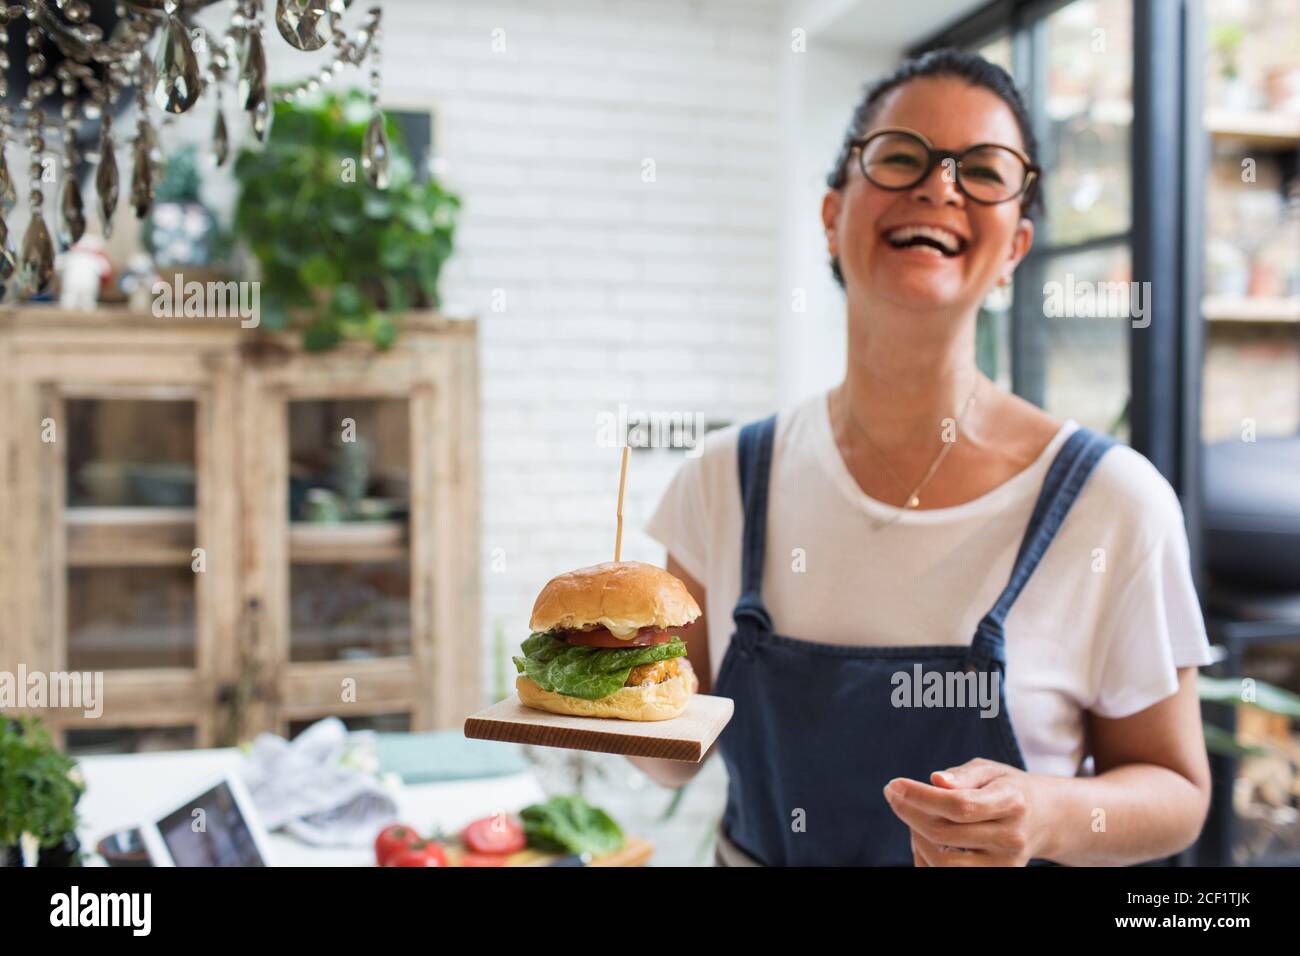 Portrait laughing woman holding cheeseburger on cutting board Stock Photo